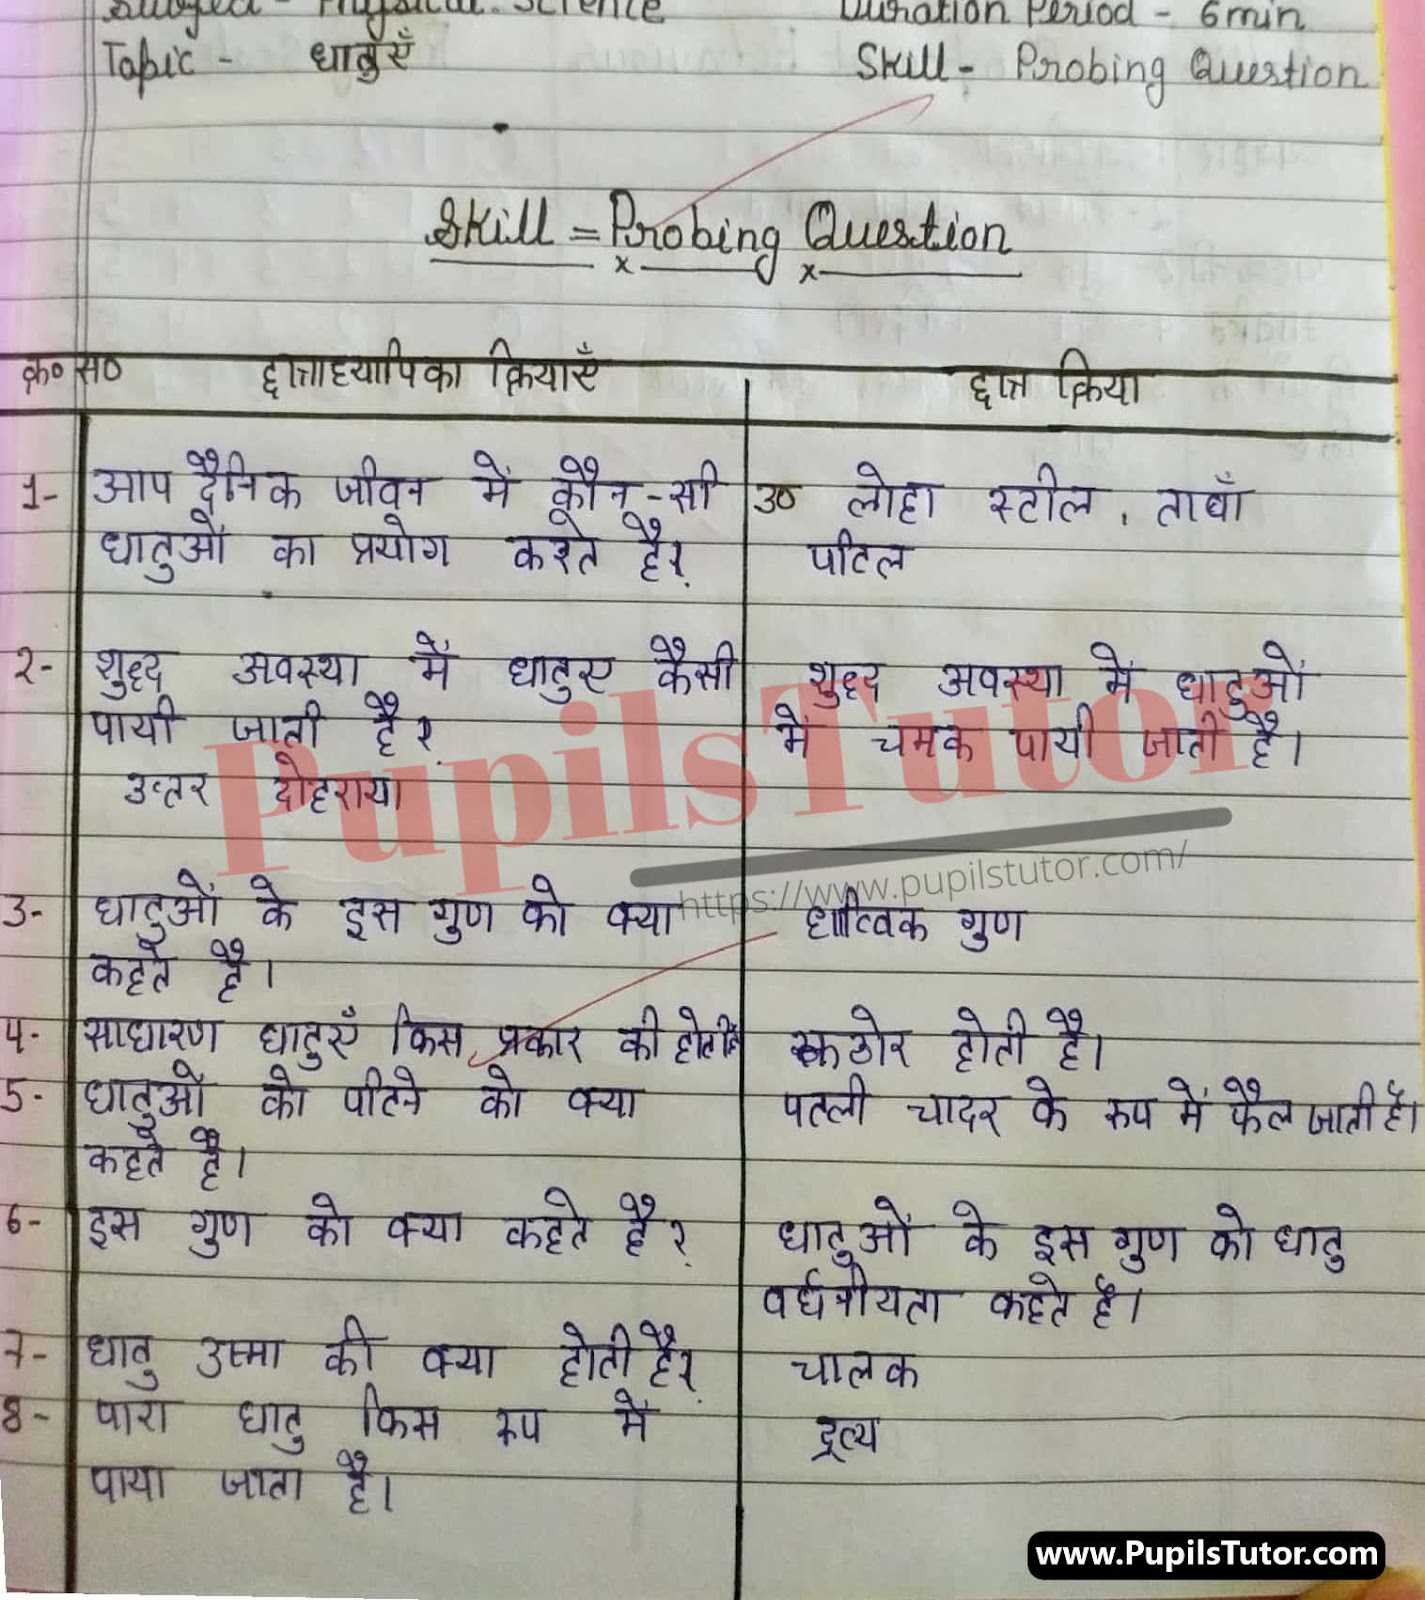 Dhatu Lesson Plan | Metal Lesson Plan In Hindi For Class 6 And 7 – (Page And Image Number 1) – Pupils Tutor